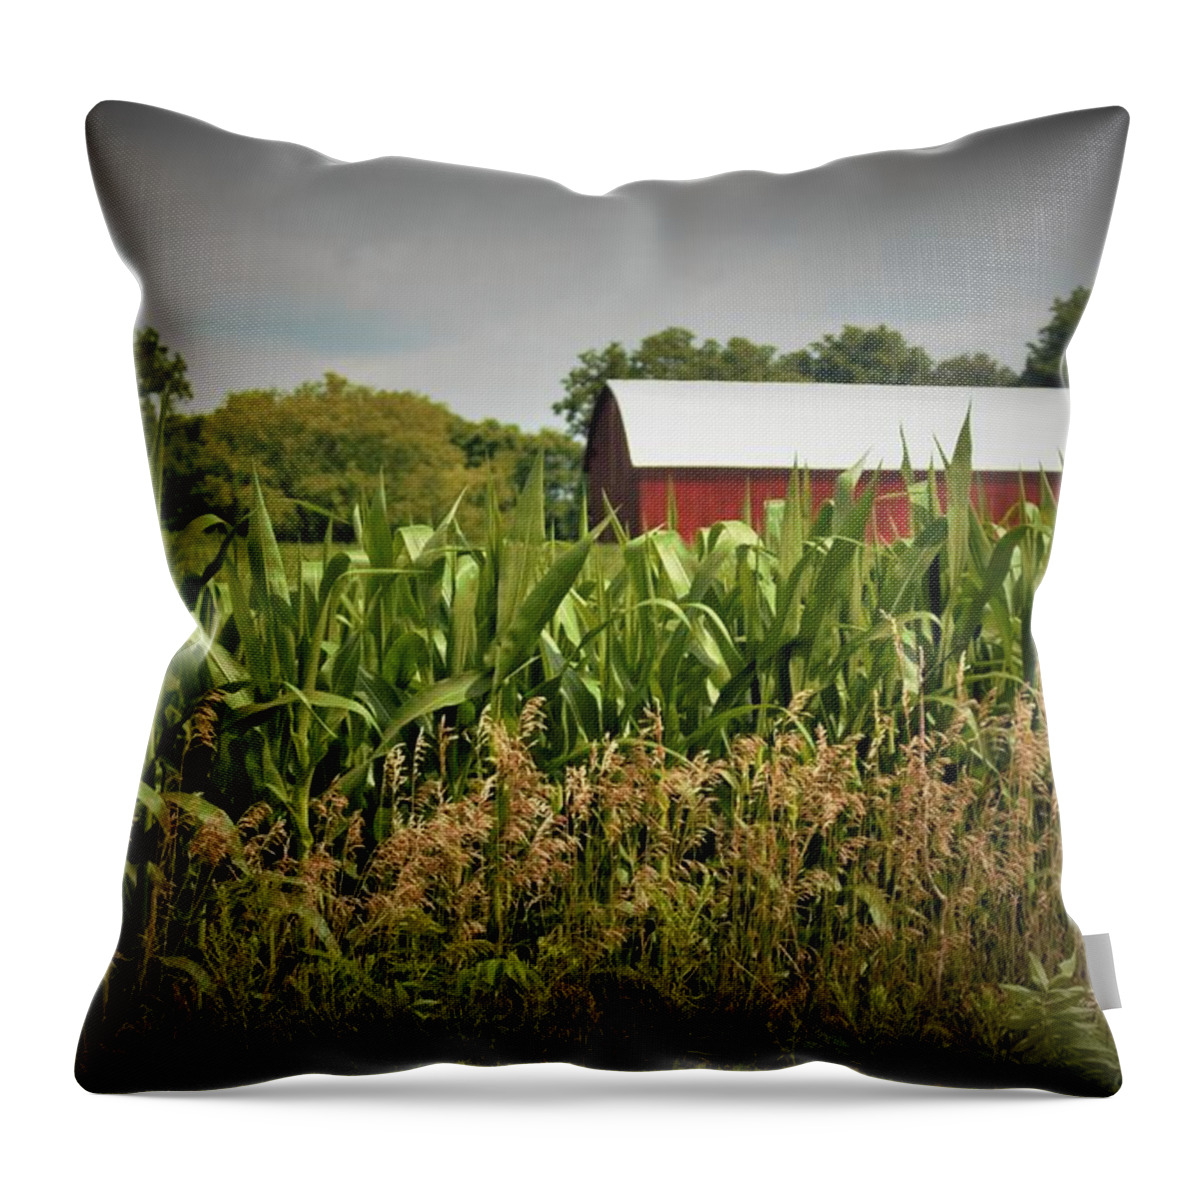 Barn Throw Pillow featuring the photograph 0020 - July Corn by Sheryl L Sutter